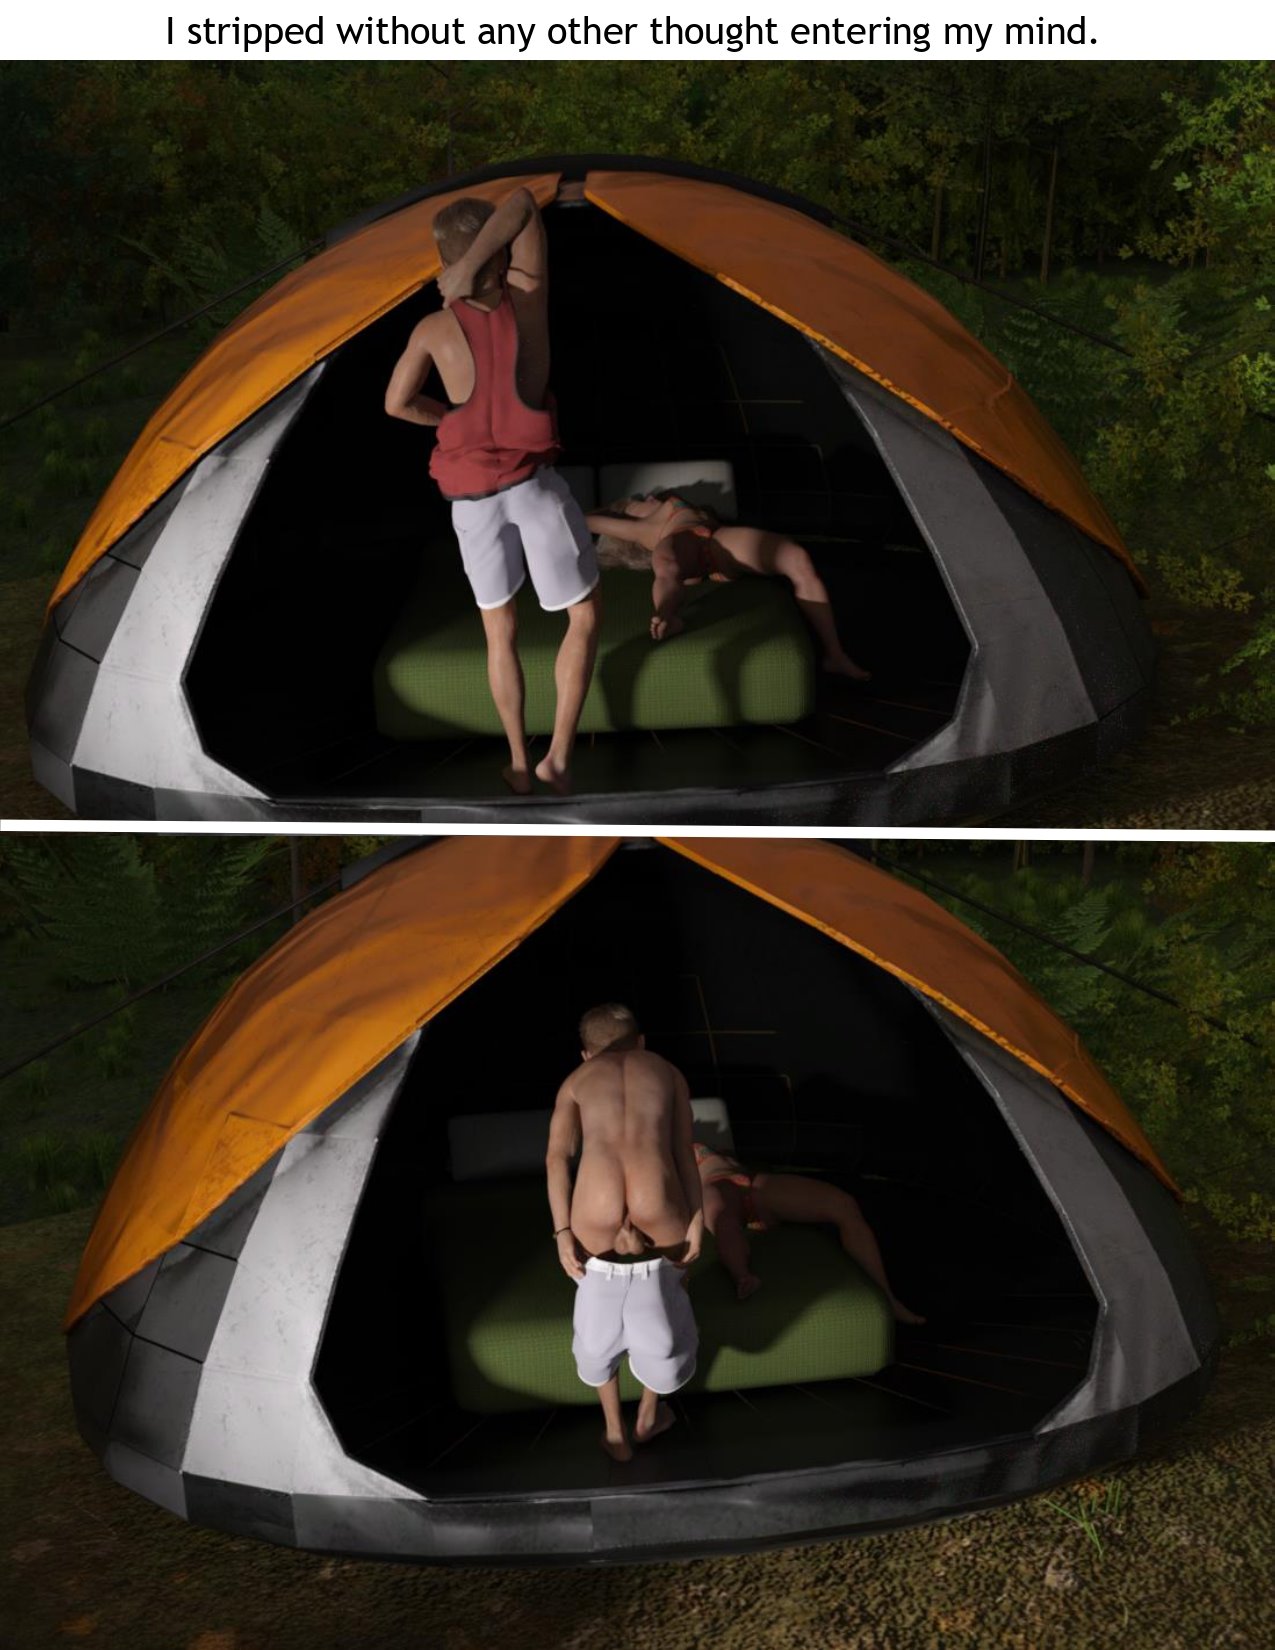 Mom And Son Porn Sex In A Tent - Mother & Son Annual Camping Trip- BBeane - Porn Cartoon Comics